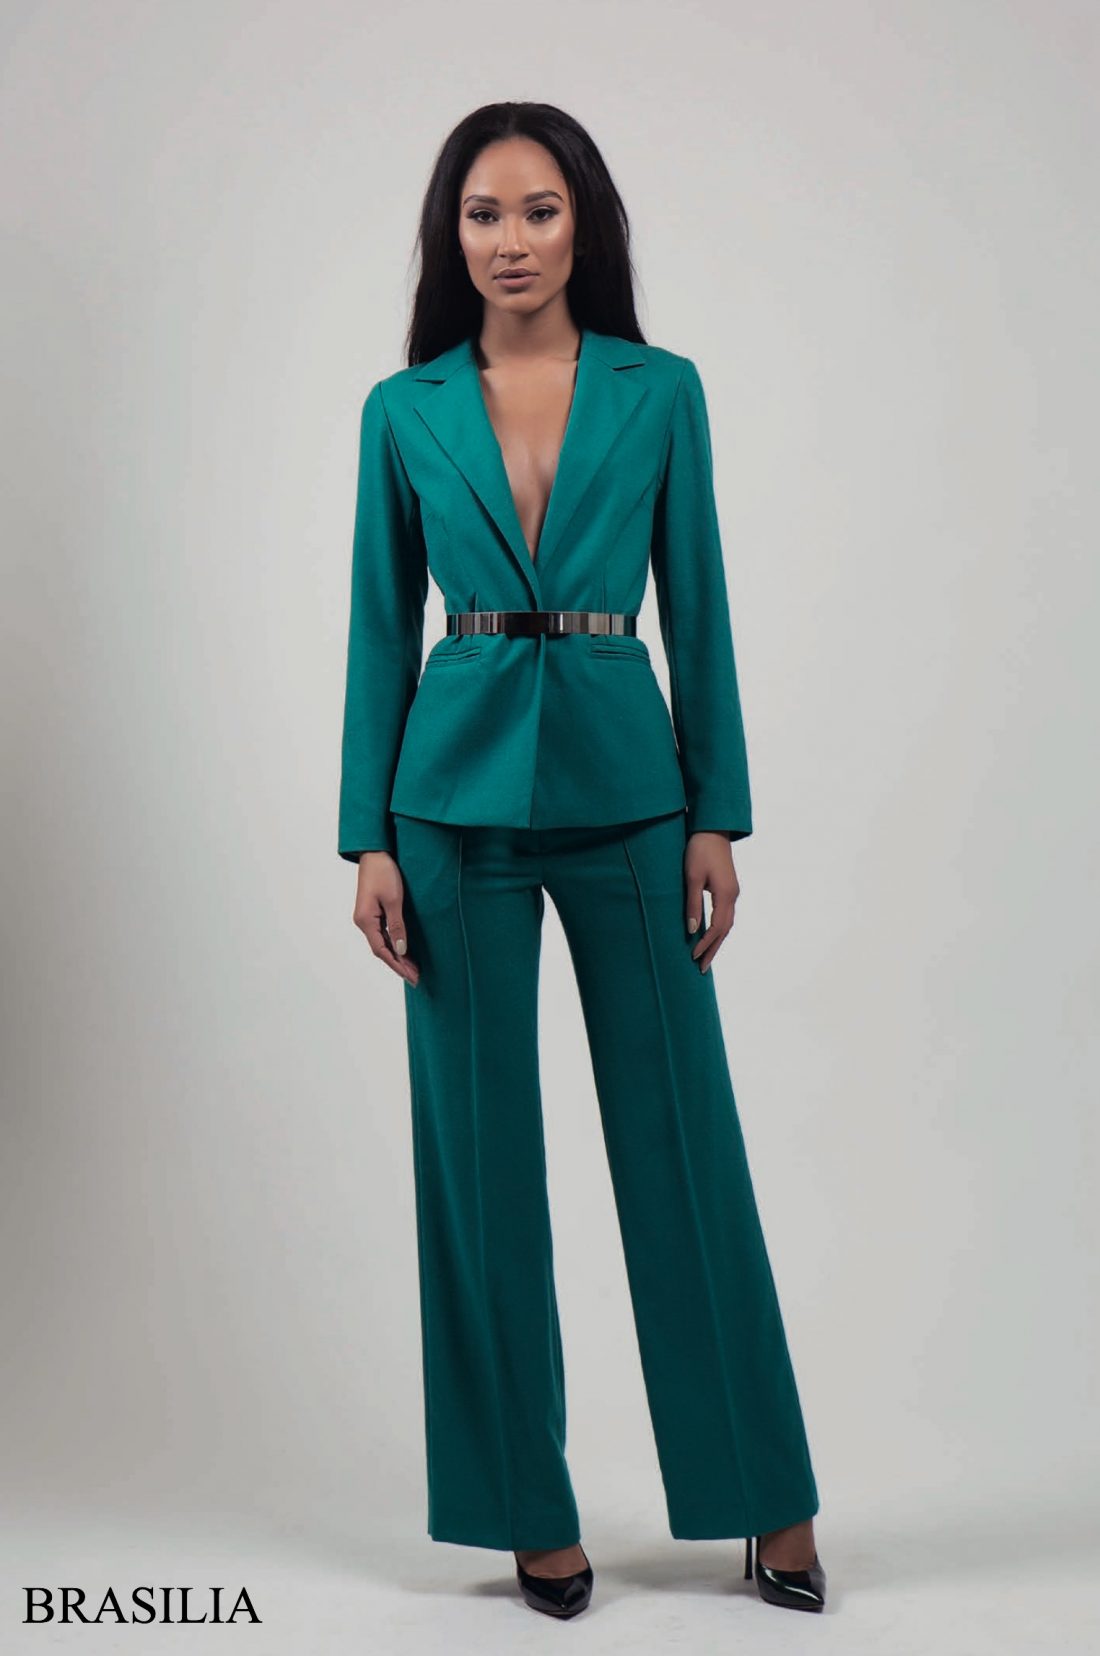 Vibrant hues, gorgeous separates: Introducing Raaah’s latest collection 